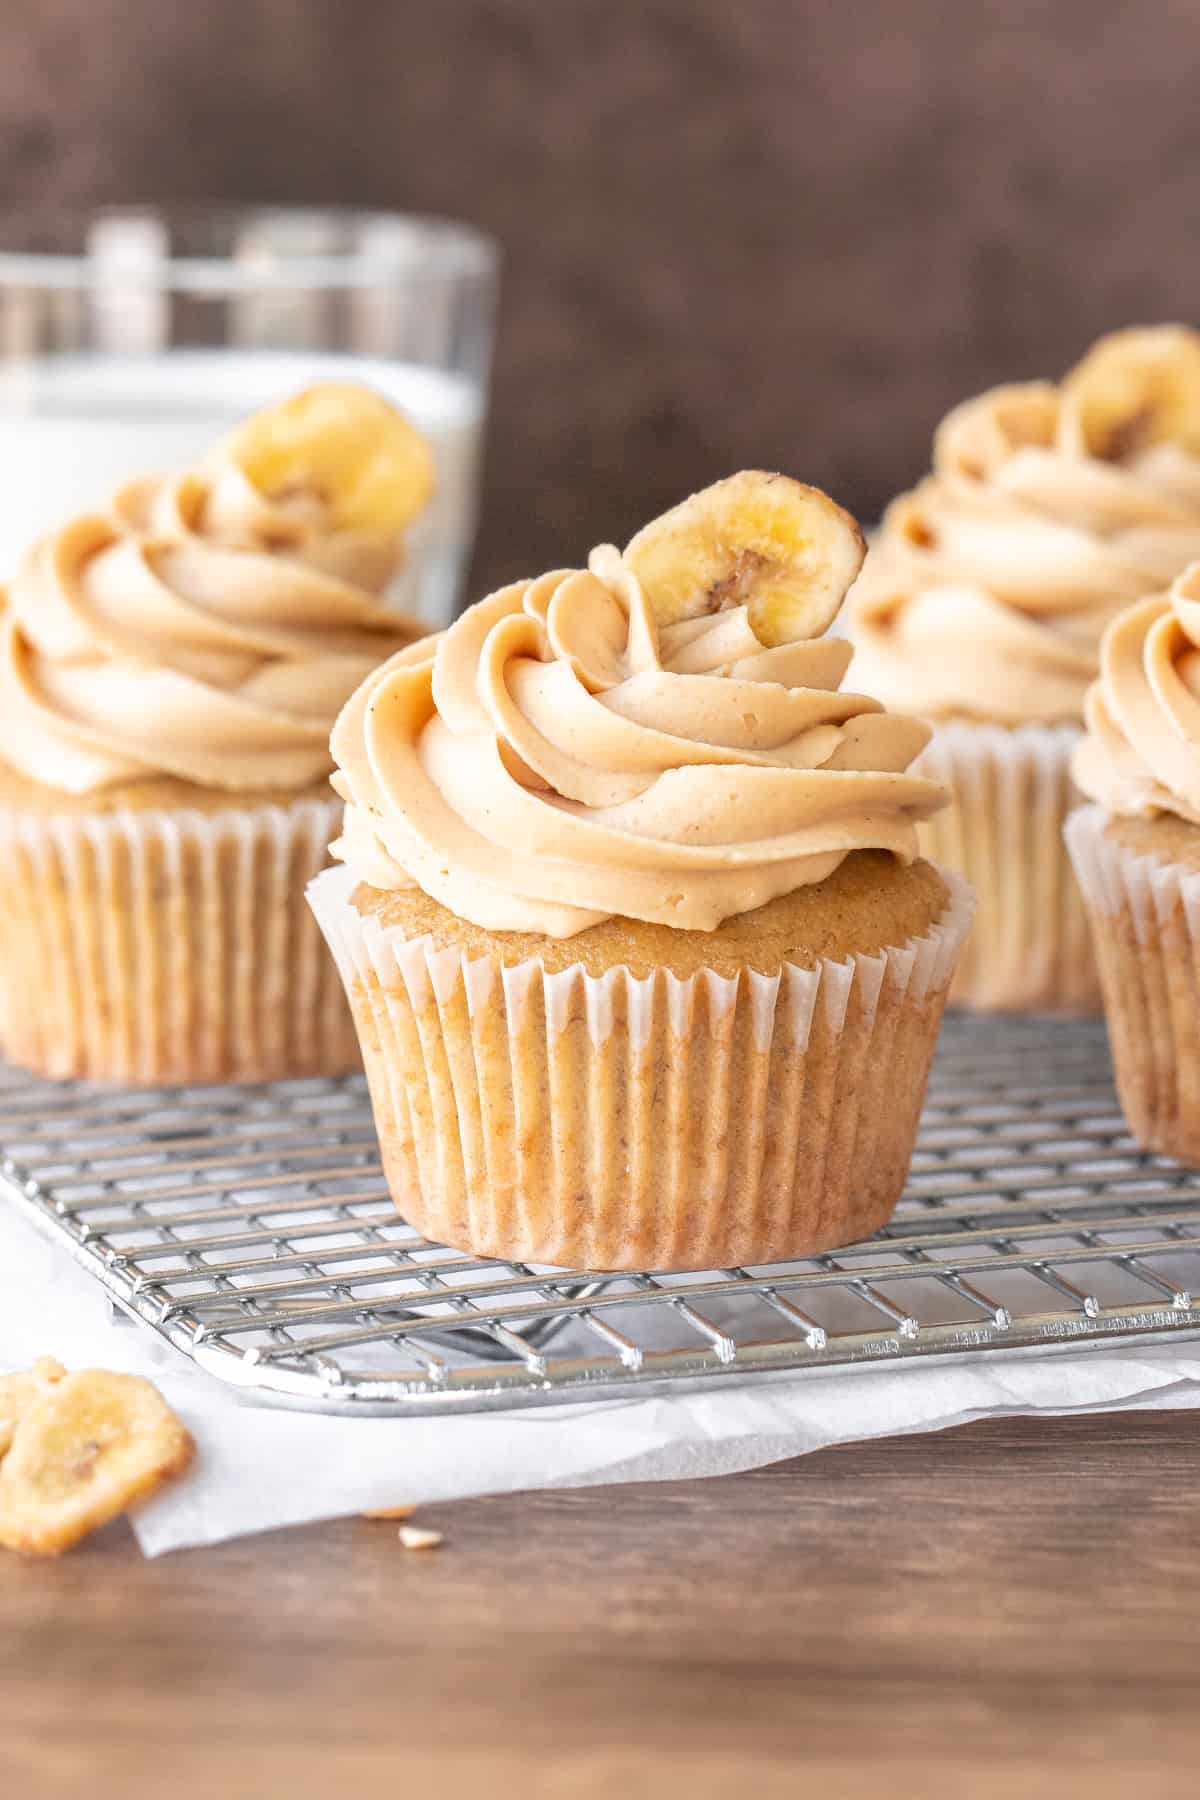 Banana peanut butter cupcakes on a cooling rack